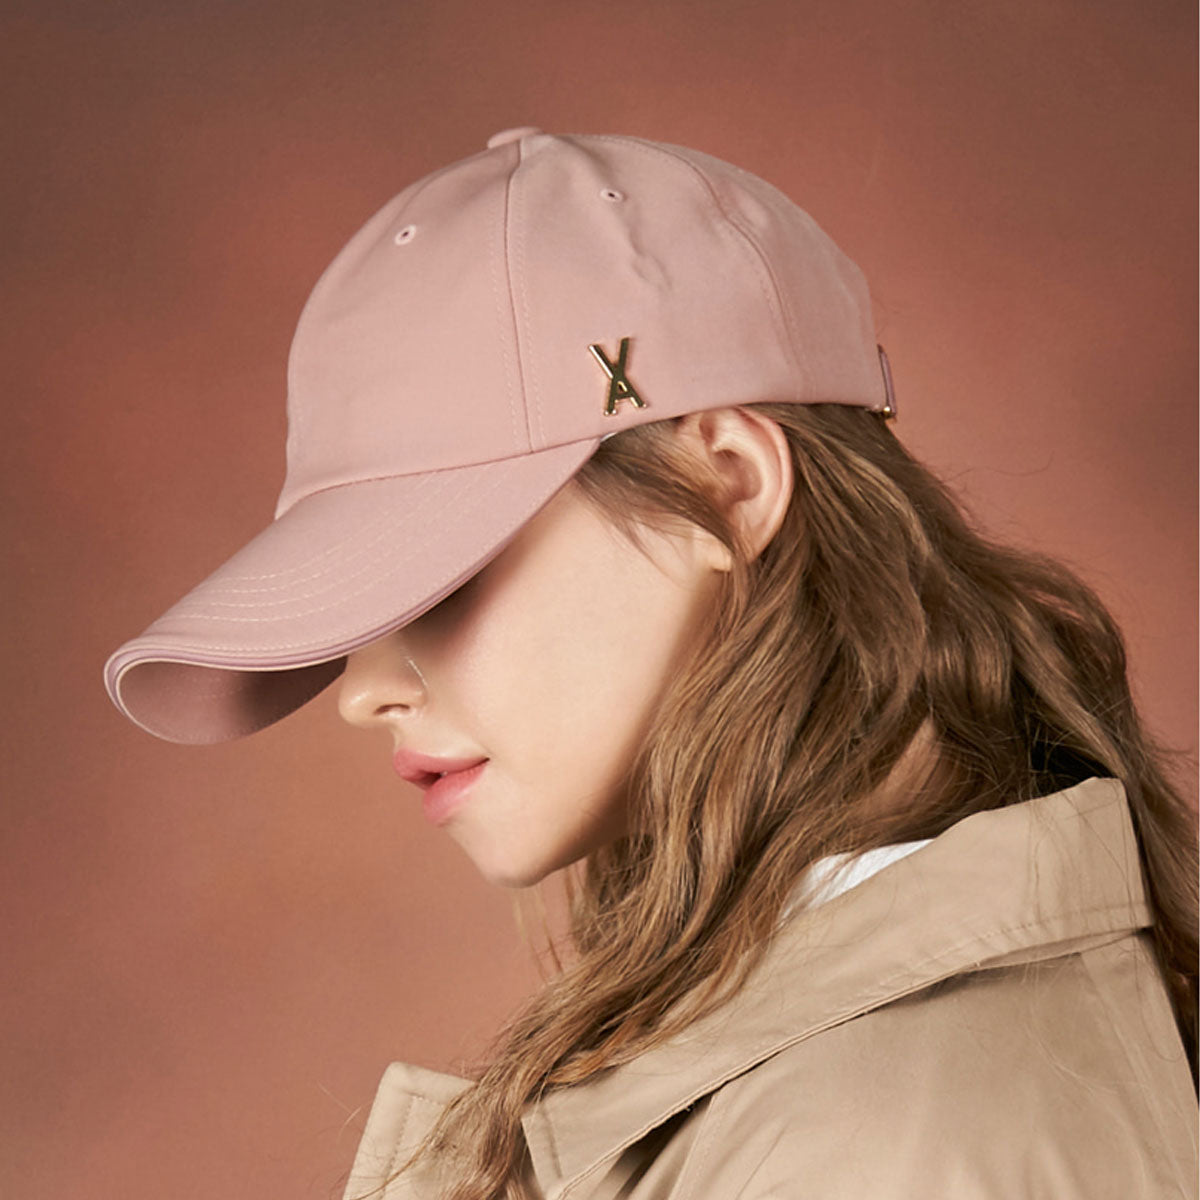 VARZAR - GOLD STUD OVER FIT BALL CAP PINK【VZR4-0005】